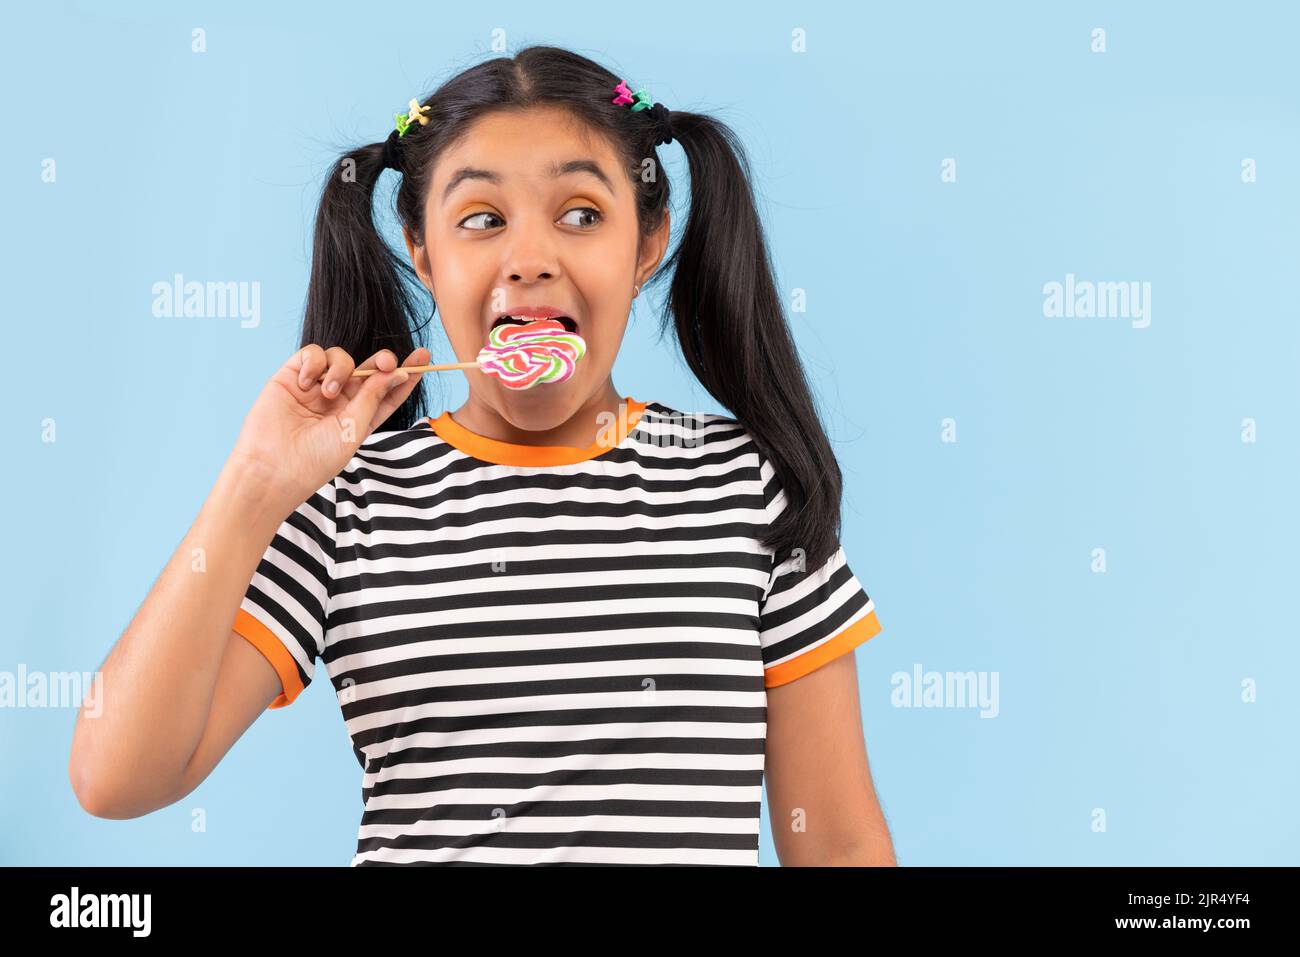 Close-up of little girl licking lollipop against plain background Stock Photo